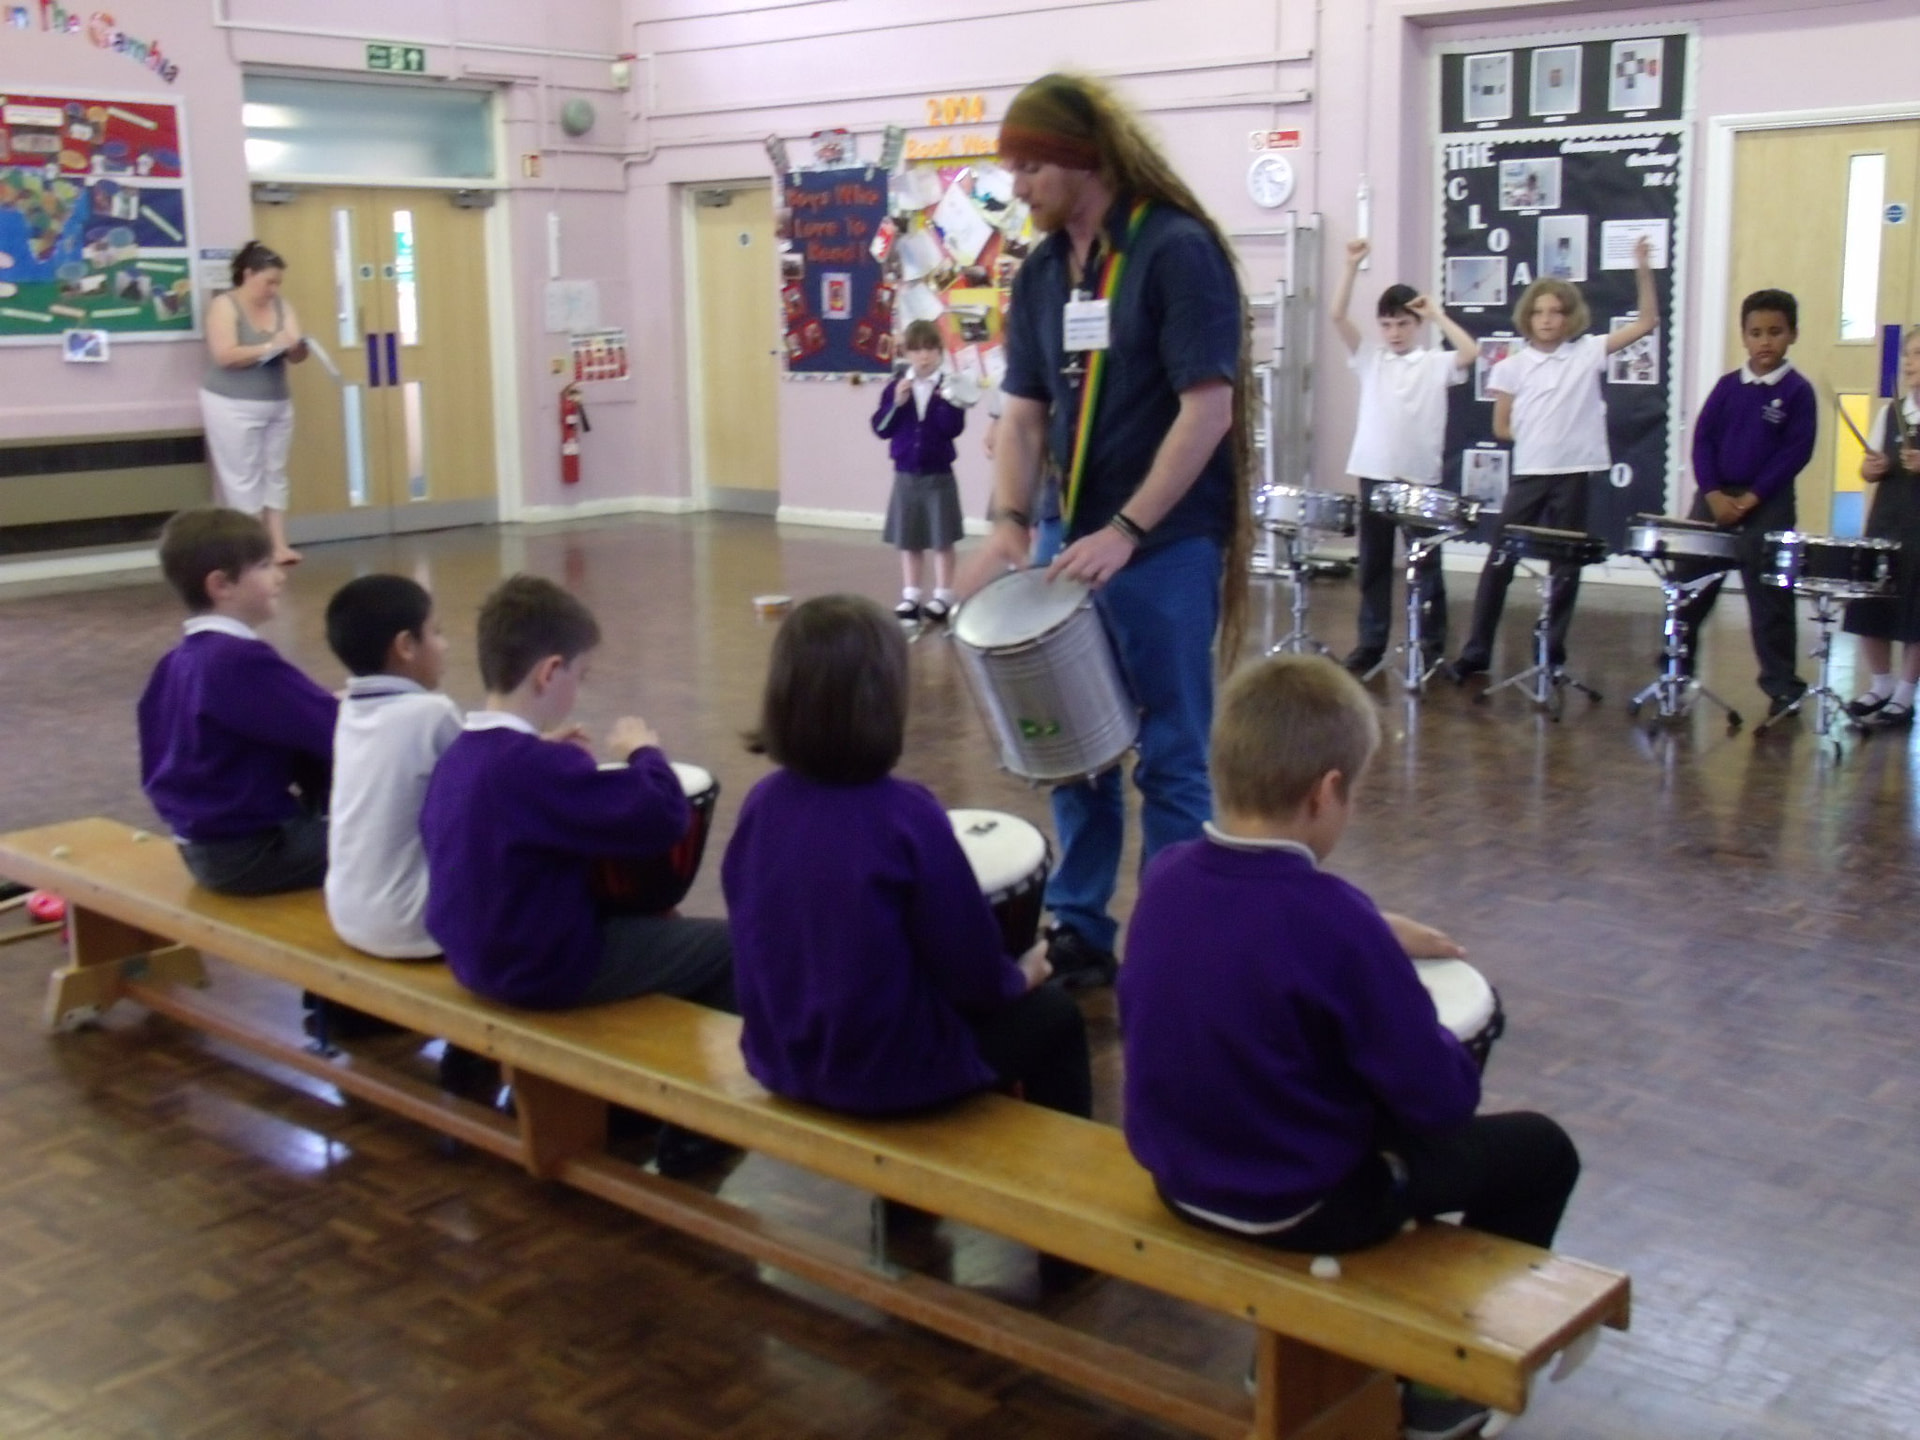 Teacher demonstrating to school children sitting on a bench how to play Samba drums